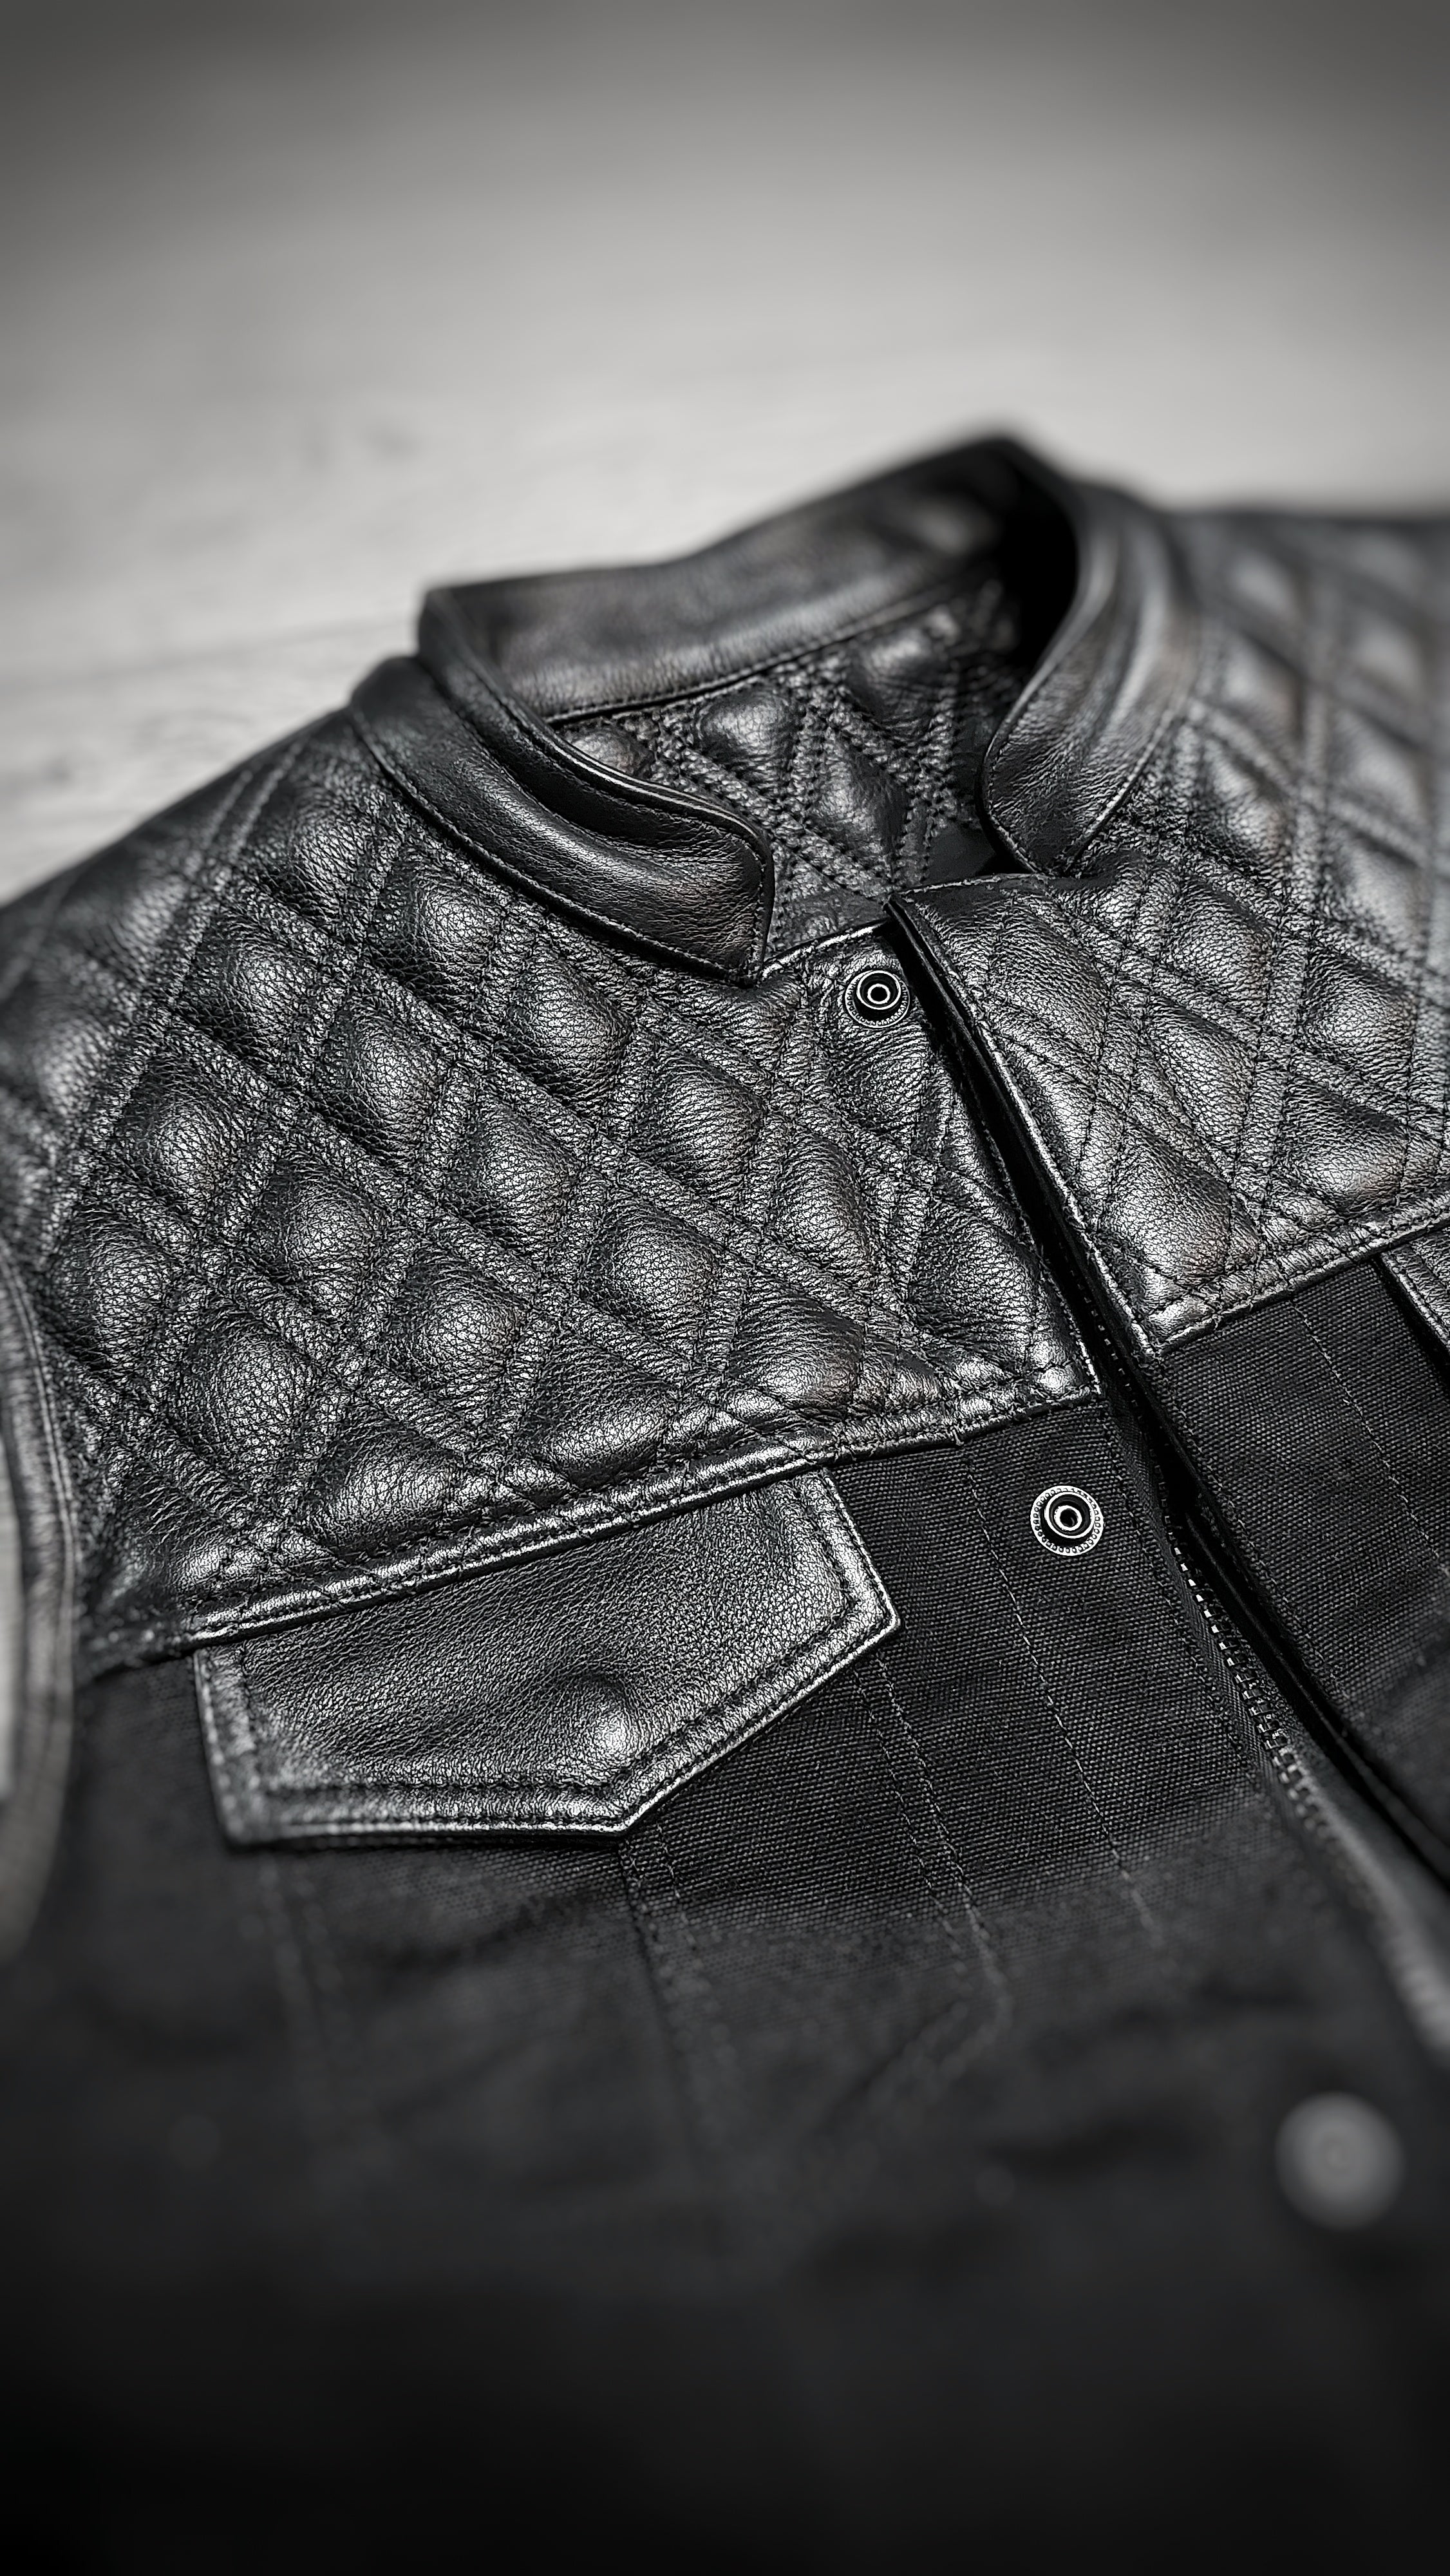 REVERSIBLE US "OFF THE RACK" STEALTH-FIFTY VEST